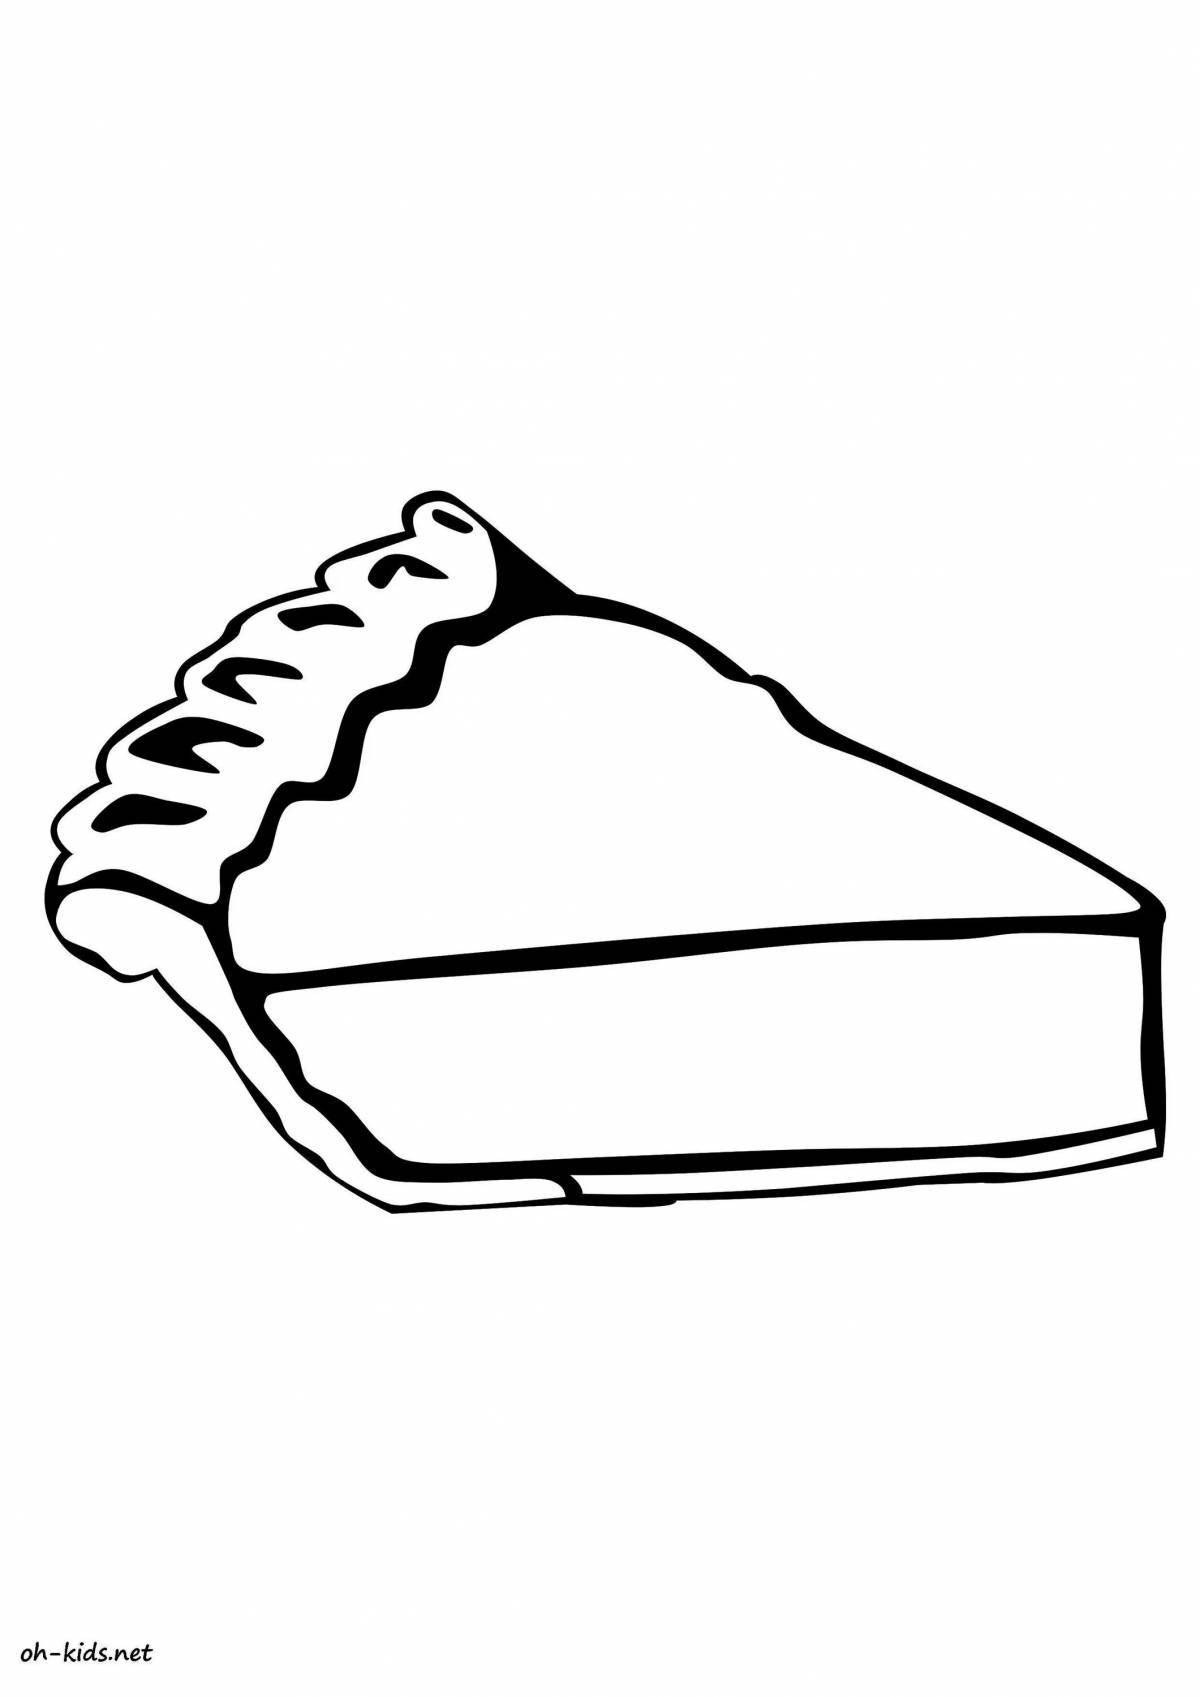 Coloring ambrosial slice of pie